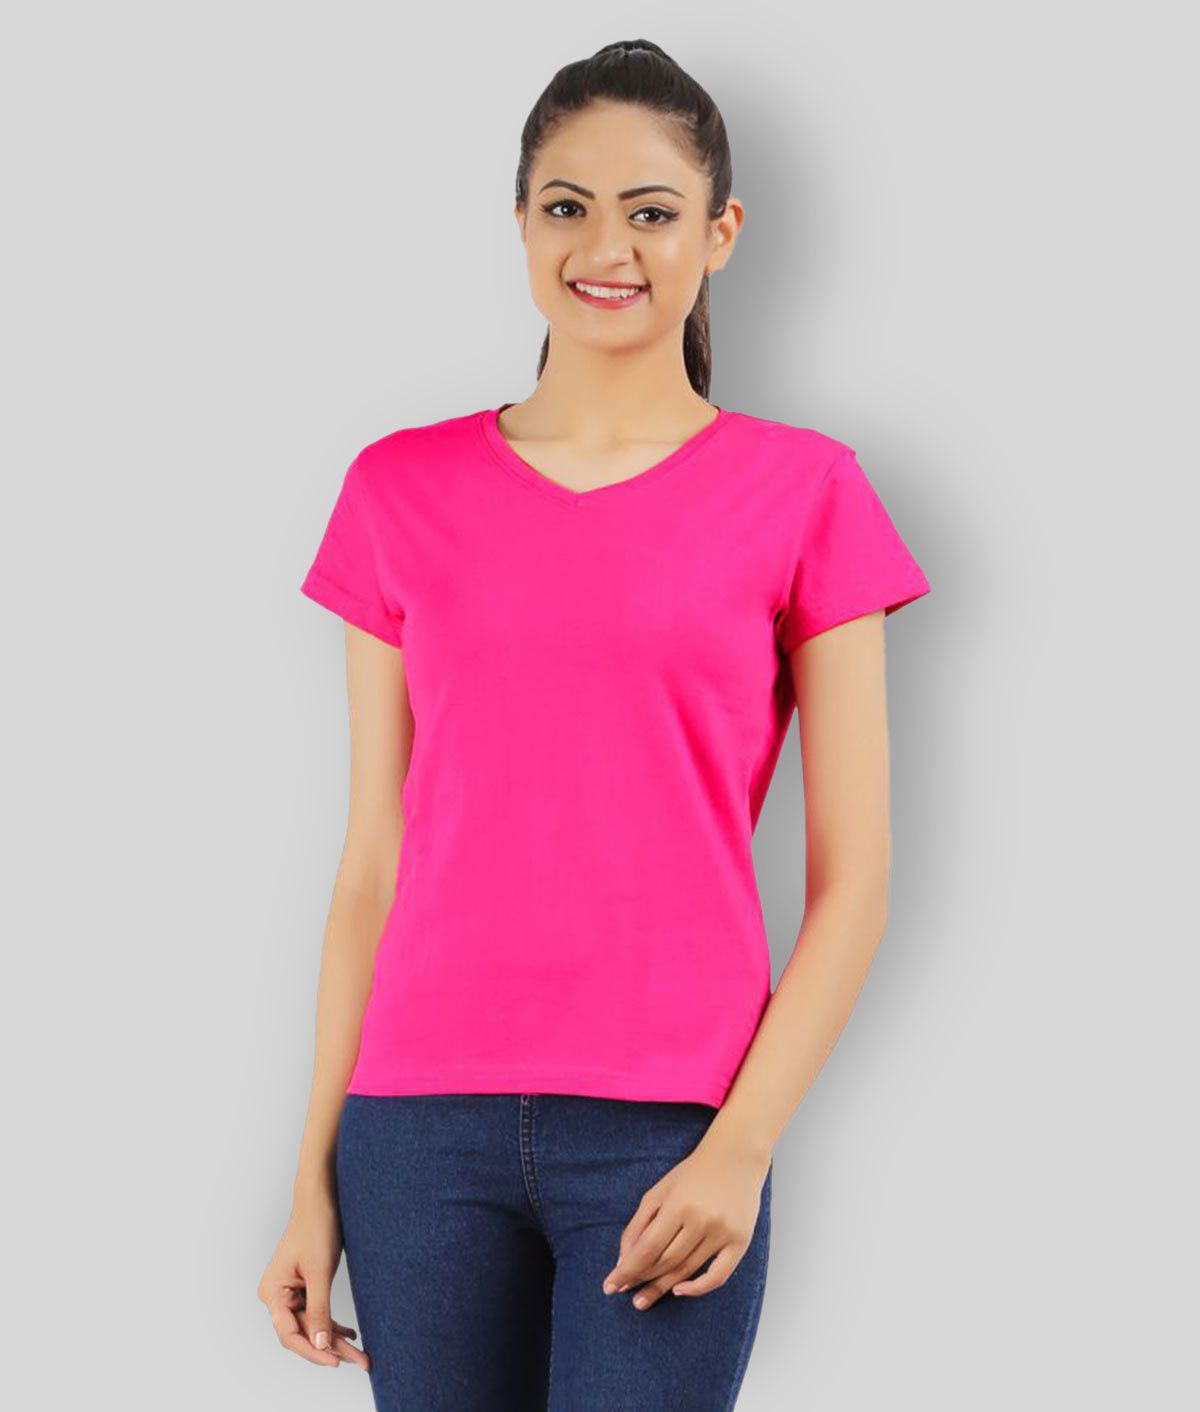     			Ap'pulse - Pink Cotton Women's A-Line Top ( Pack of 1 )